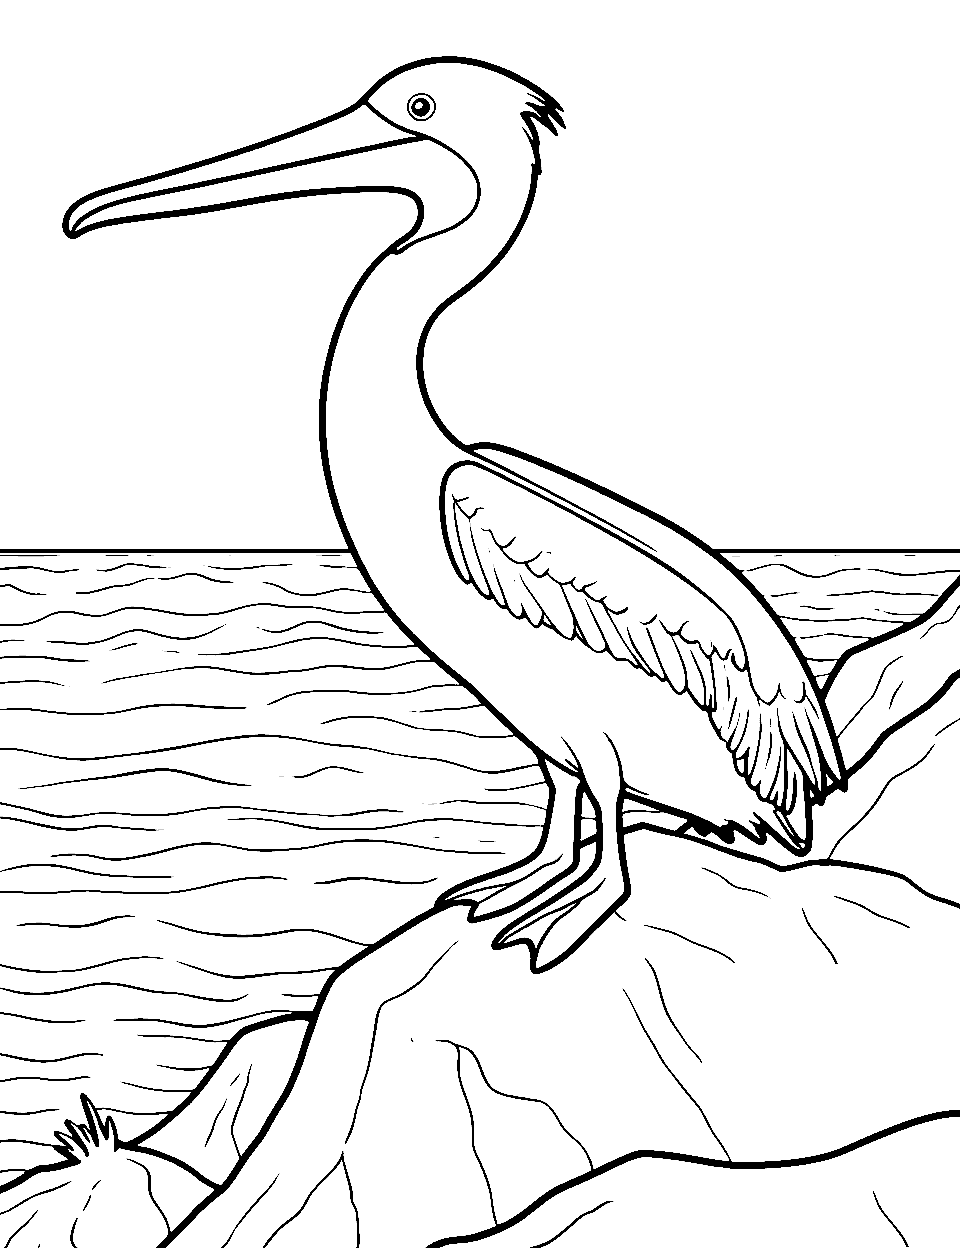 Coastal Bird Watching Ocean Coloring Page - A pelican bird perched on a cliff with the ocean below.